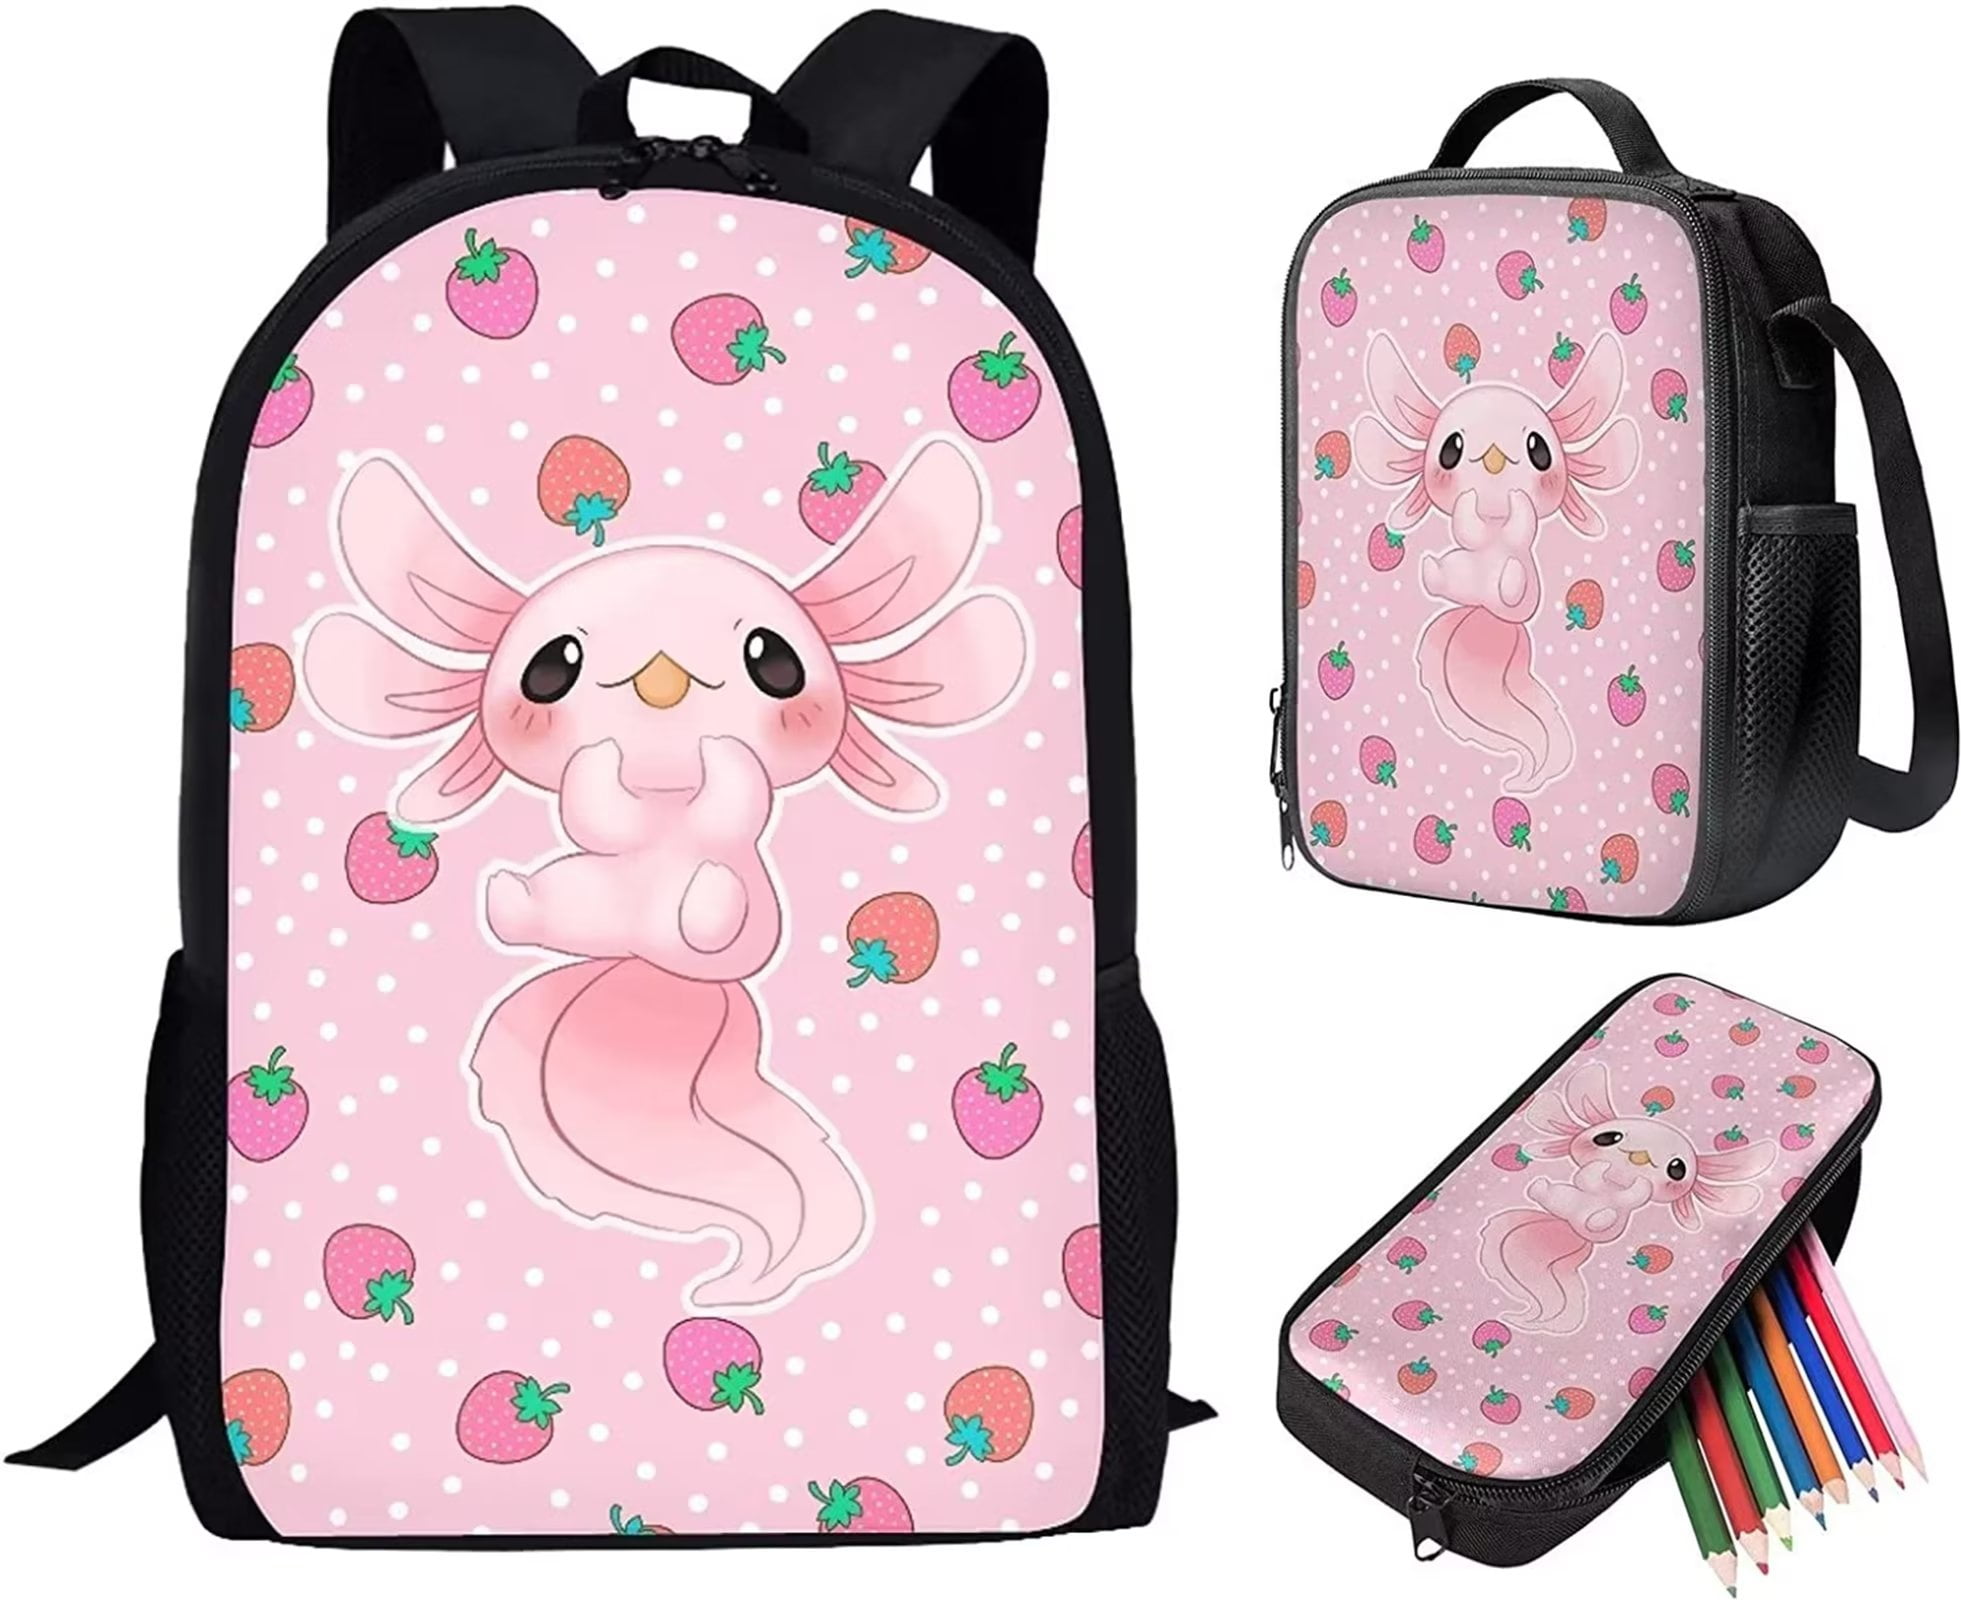 Renewold Strawberry Backpack Cute Axolotl 3 in 1 School Bag Sets with ...